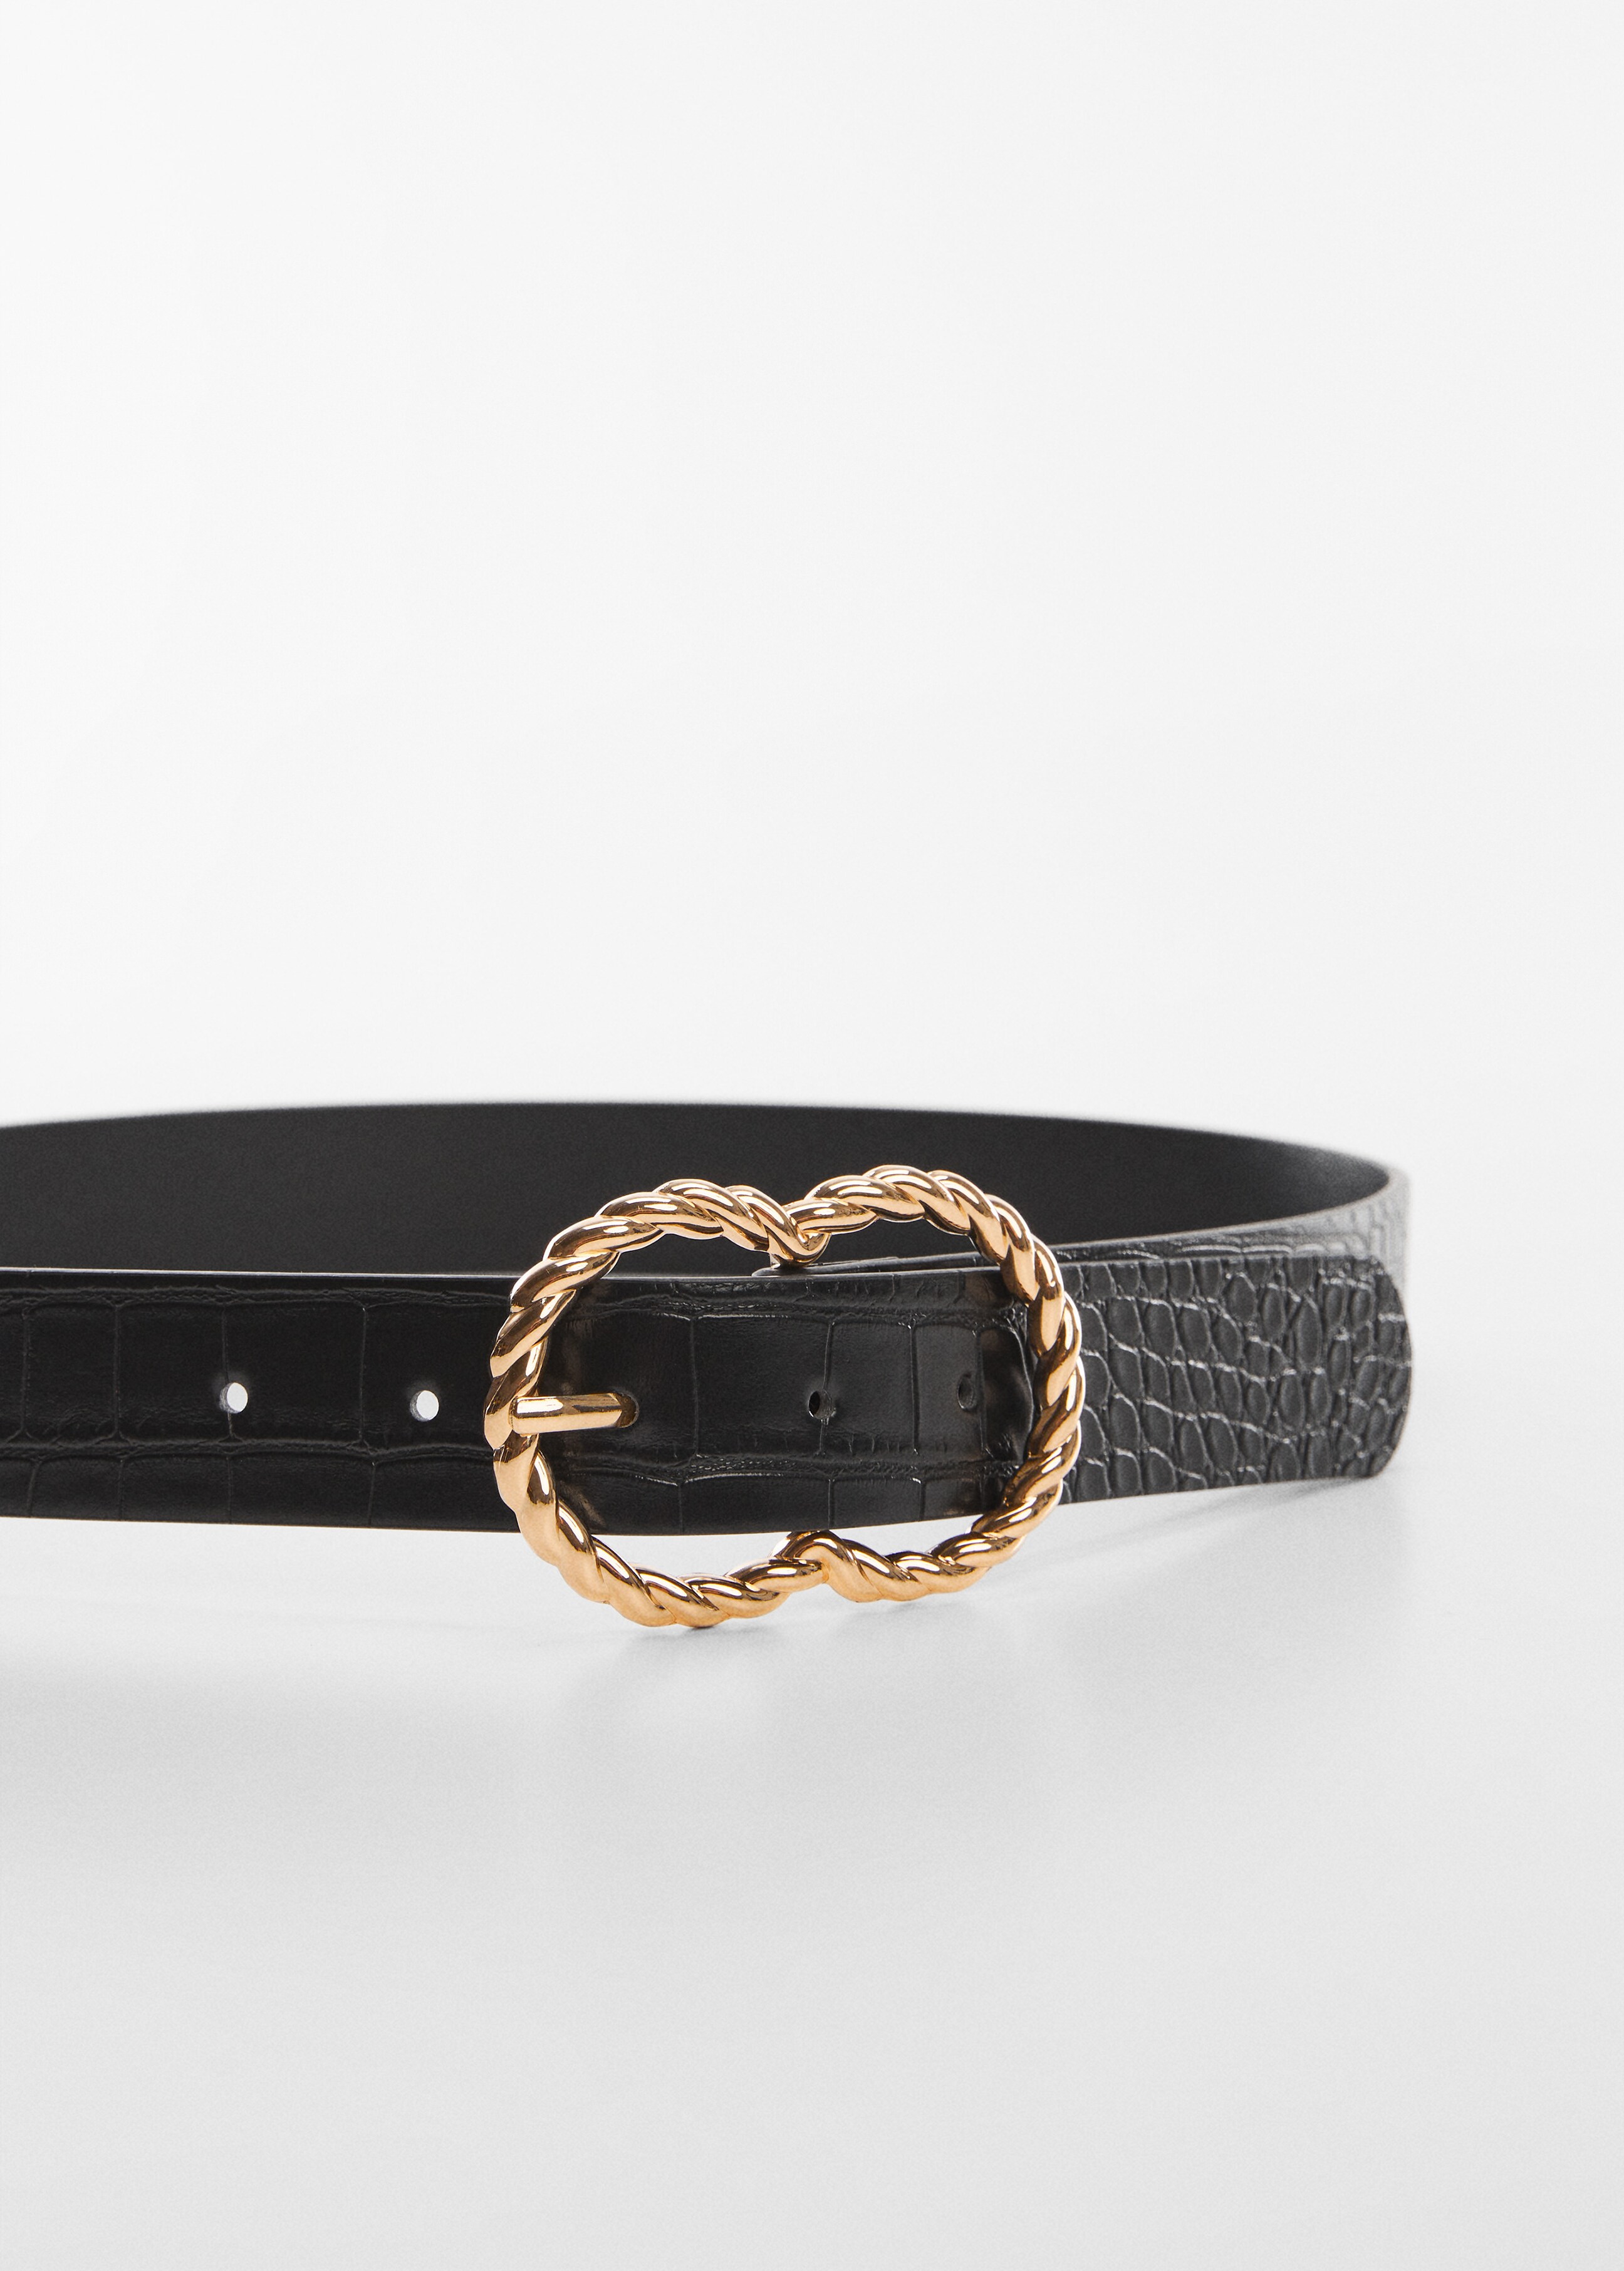 Braided belt with buckle - Details of the article 2